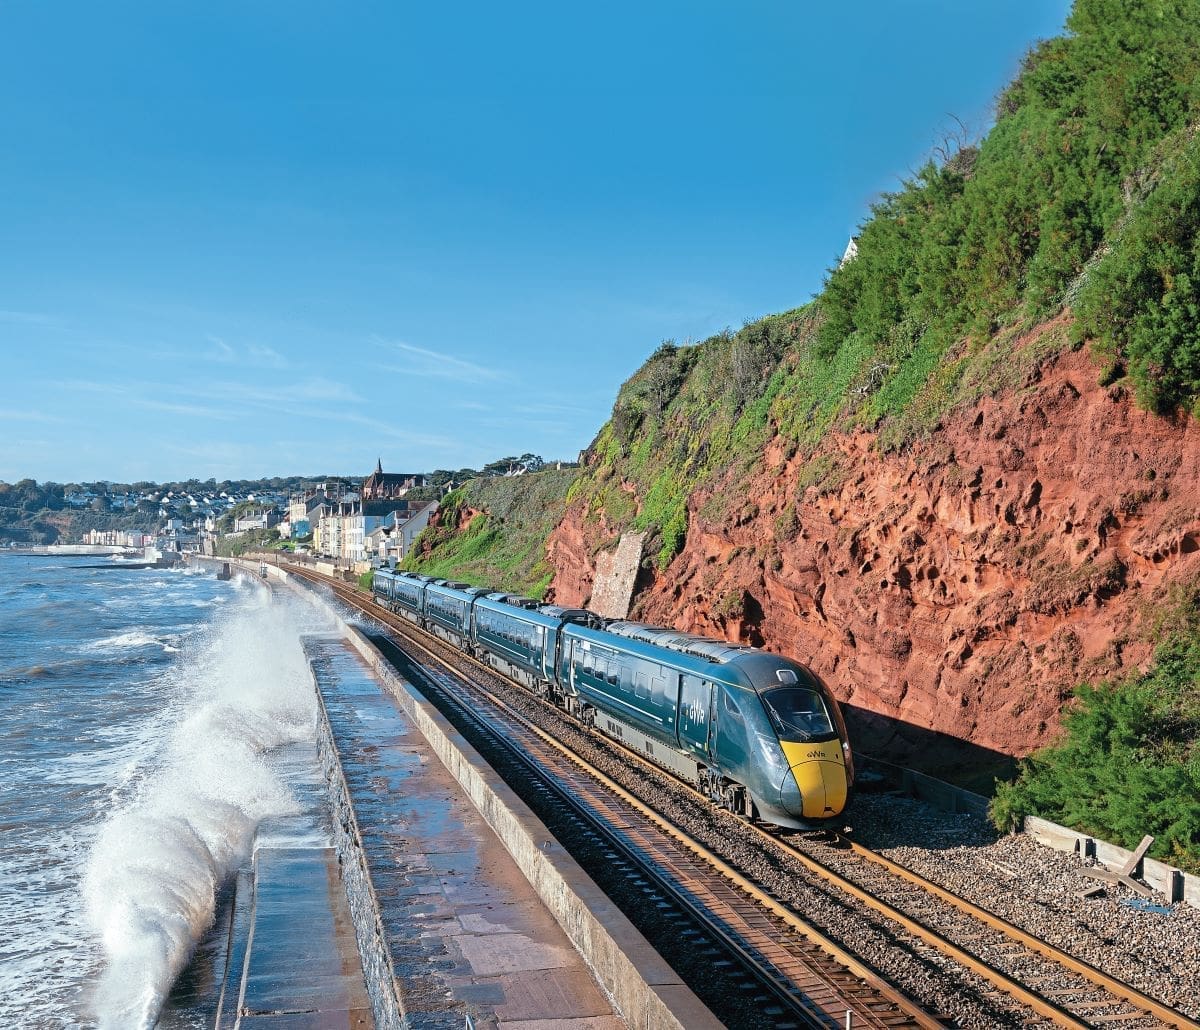 The future of Great Western Railway